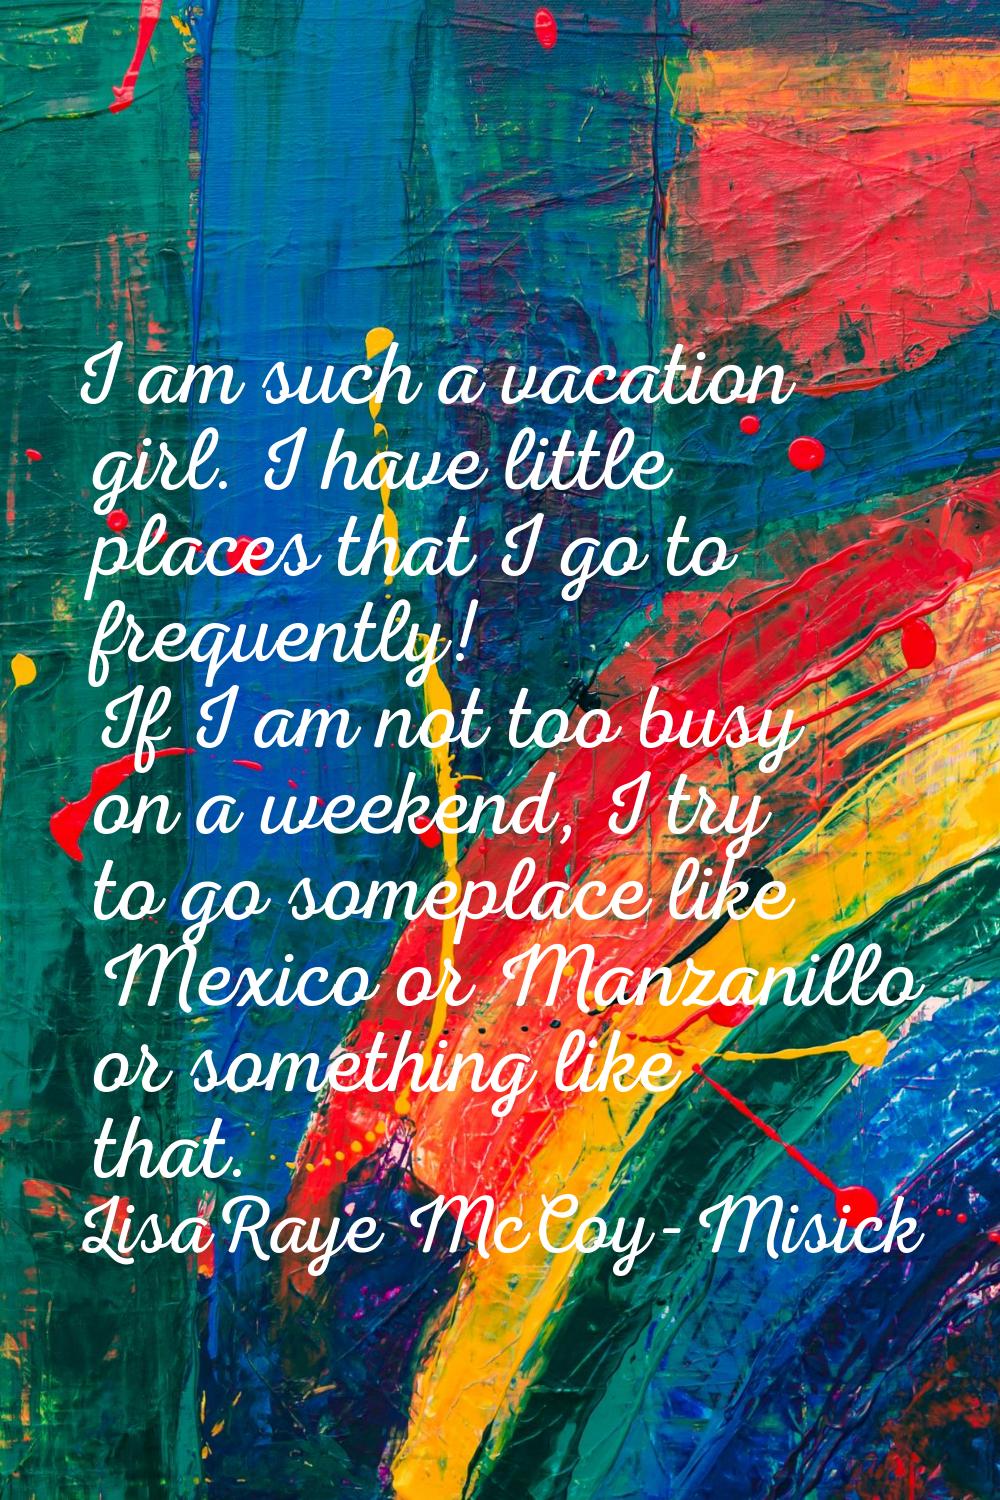 I am such a vacation girl. I have little places that I go to frequently! If I am not too busy on a 